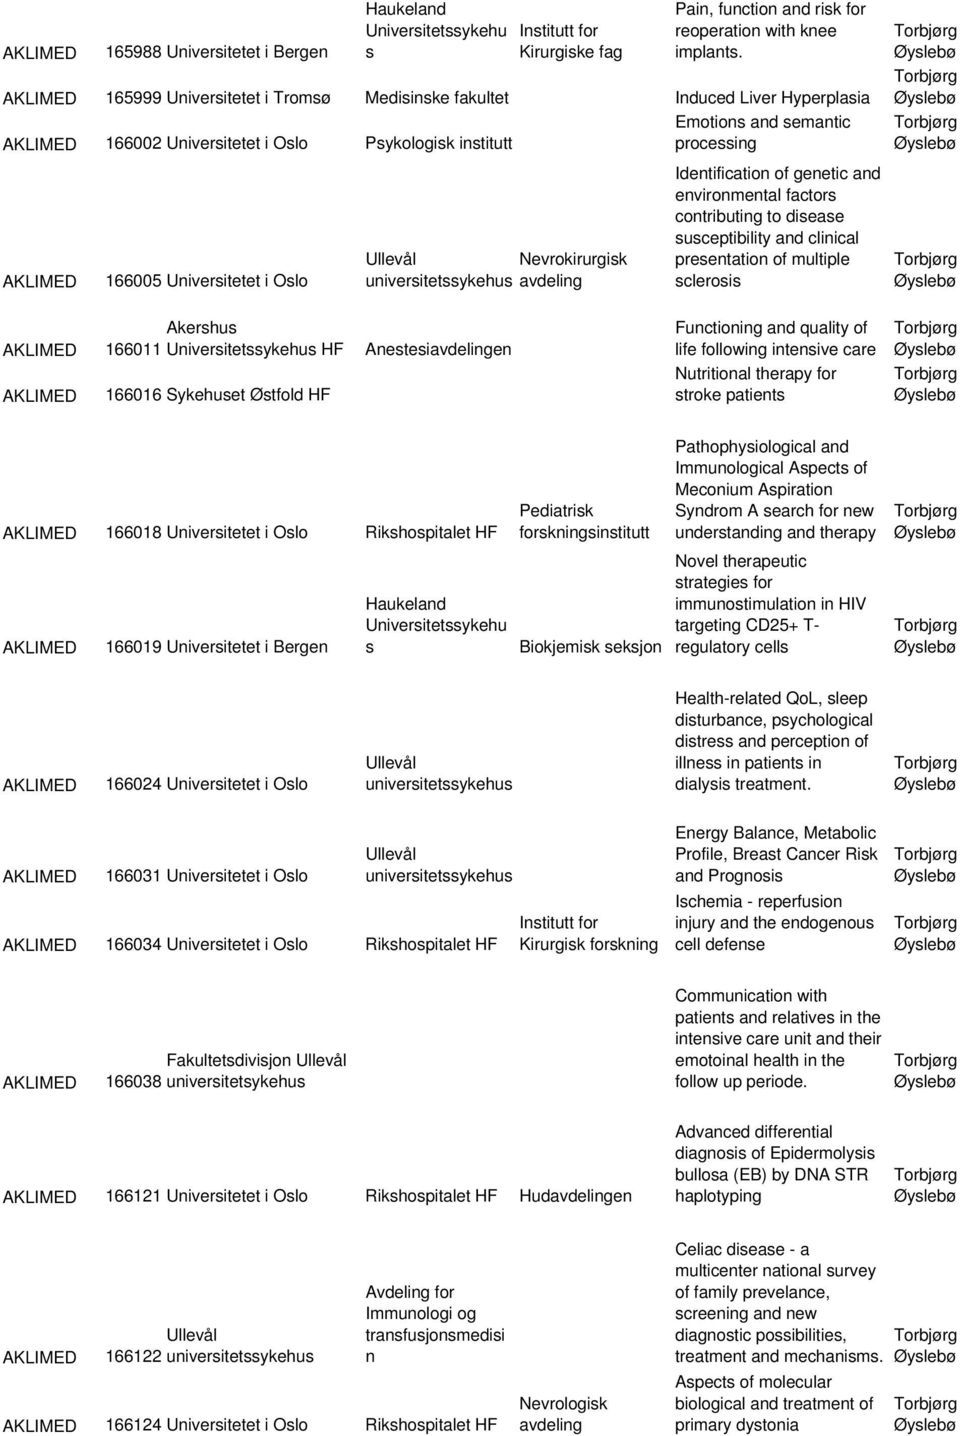 Oslo Ullevål Nevrokirurgisk universitetssykehus avdeling Identification of genetic and environmental factors contributing to disease susceptibility and clinical presentation of multiple sclerosis